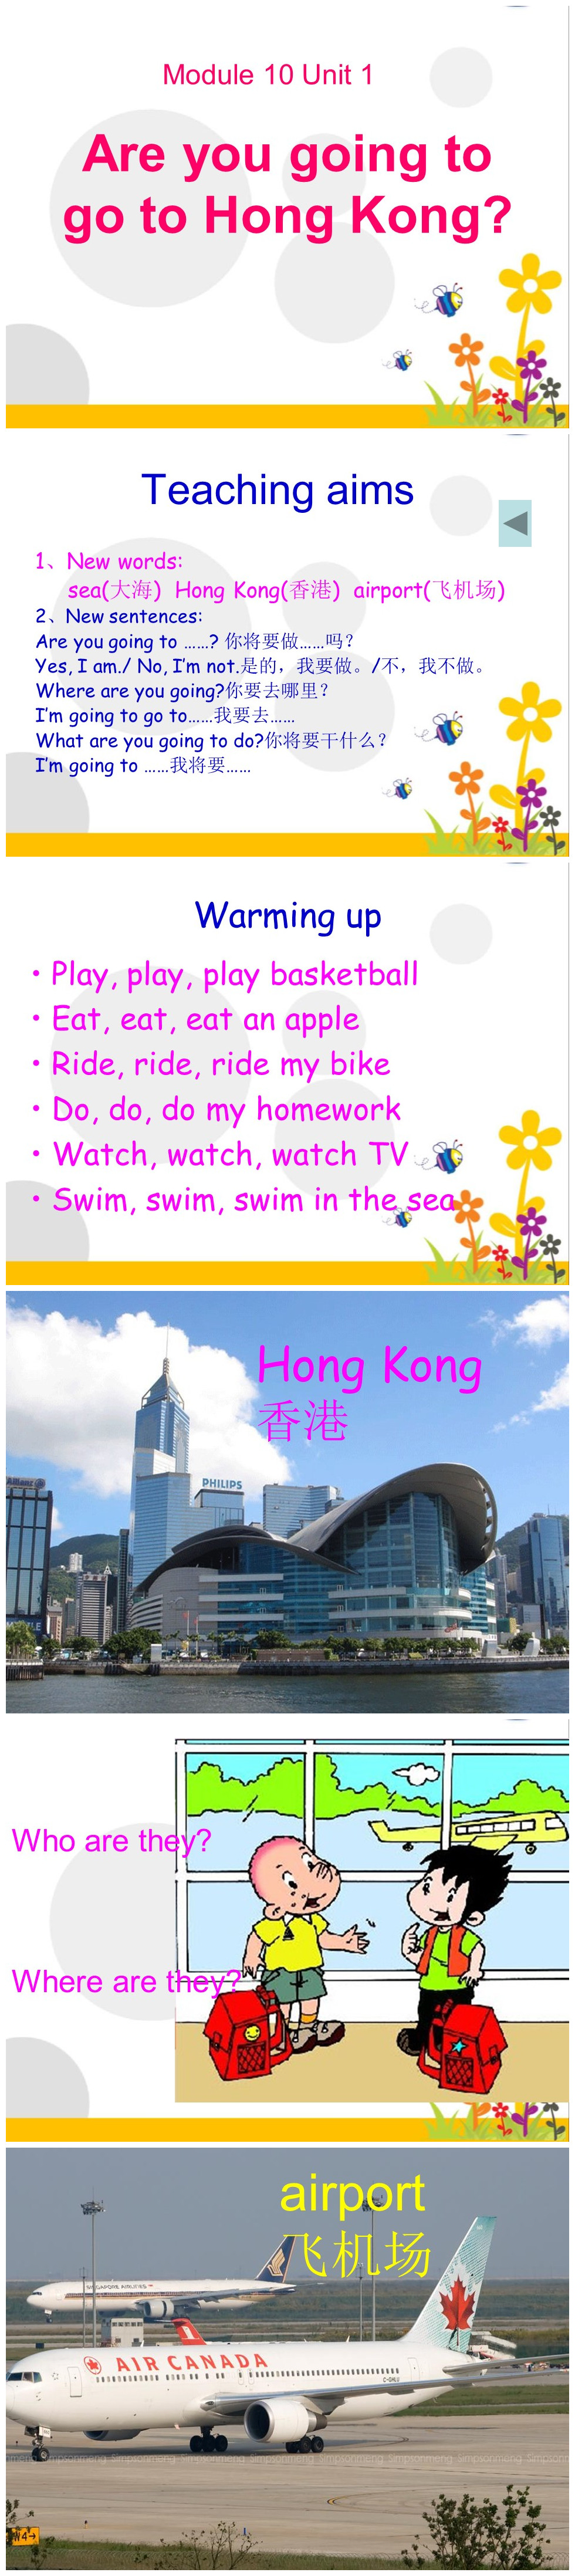 《Are you going to go to Hong Kong?》PPT课件PPT课件下载